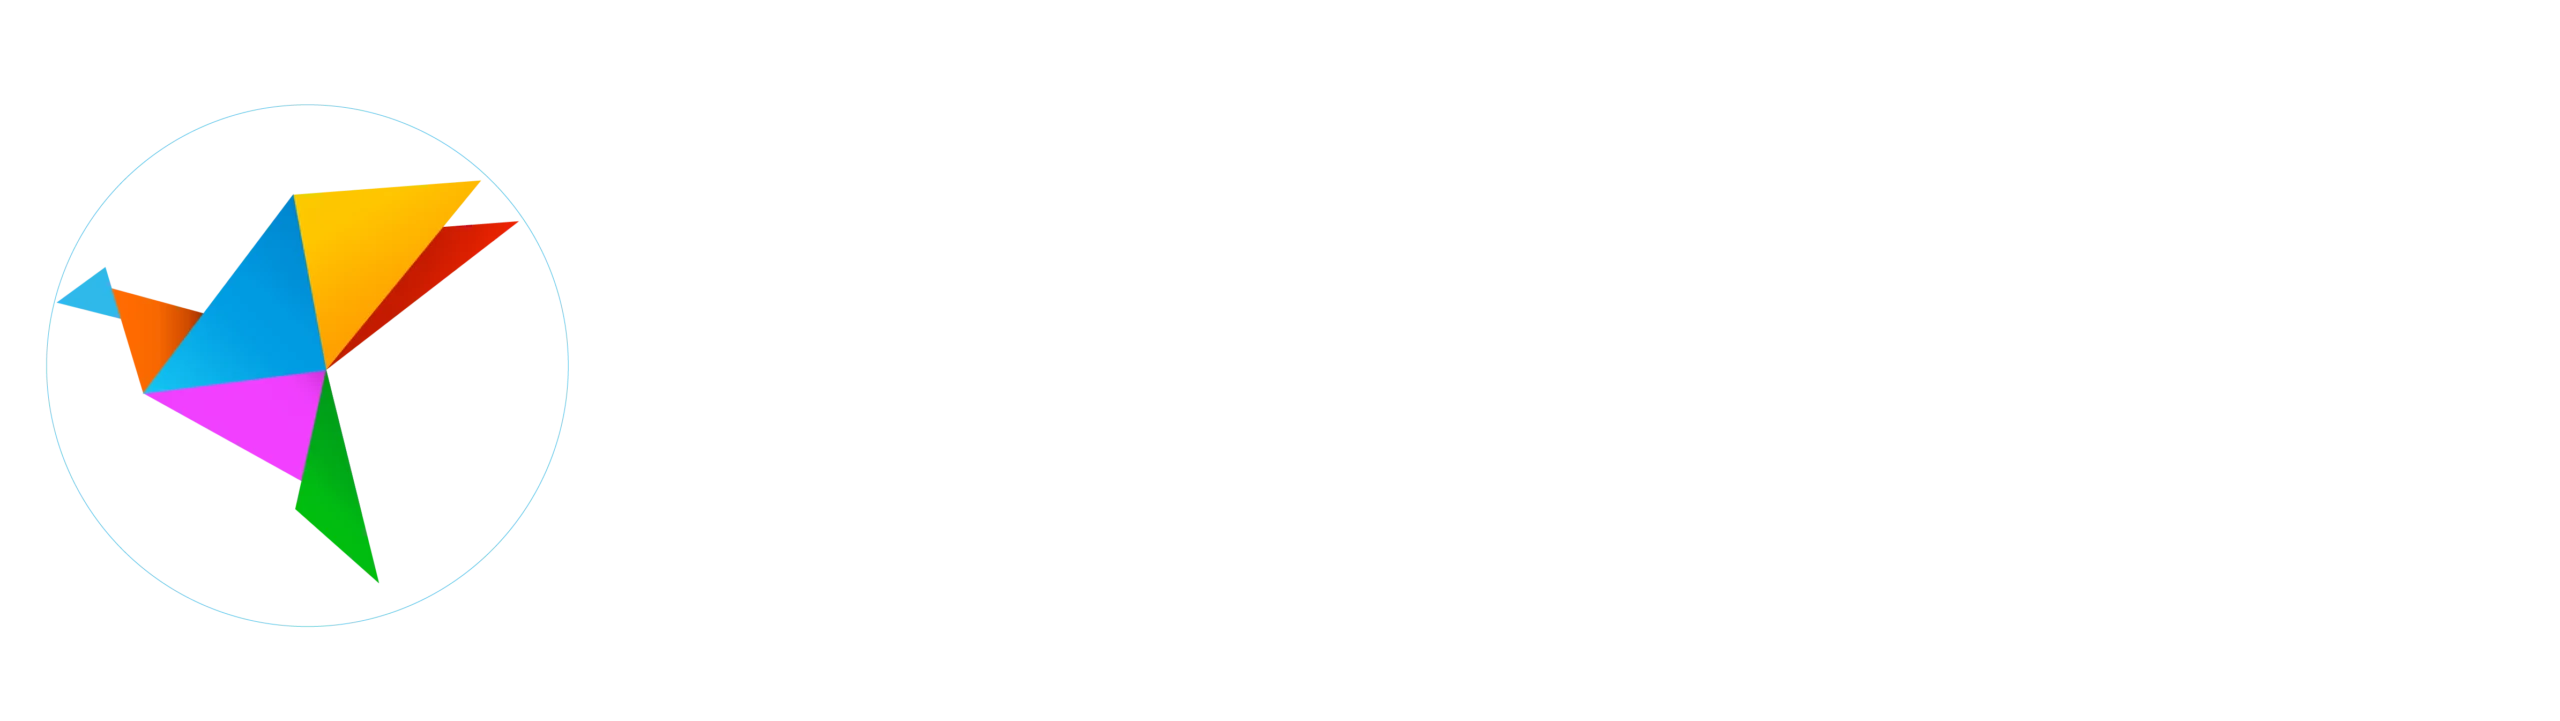 Logo of scayver graphix featuring a colorful abstract icon next to the text "scayver graphix" with a subtitle "affordable - dependable - creative solutions.